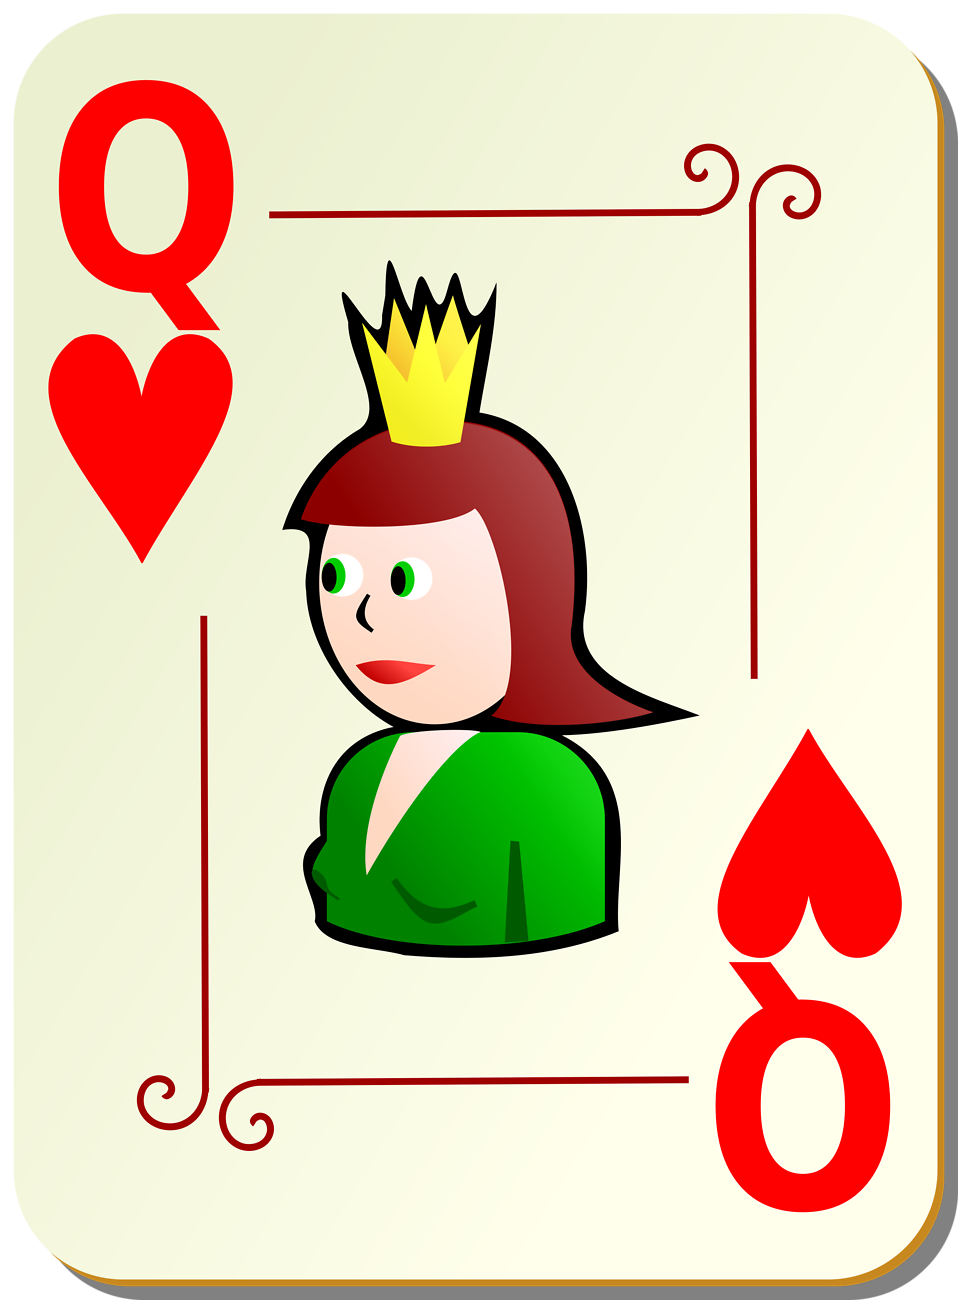 Playing Cards | Free Stock Photo | Illustration of a Queen of Hearts